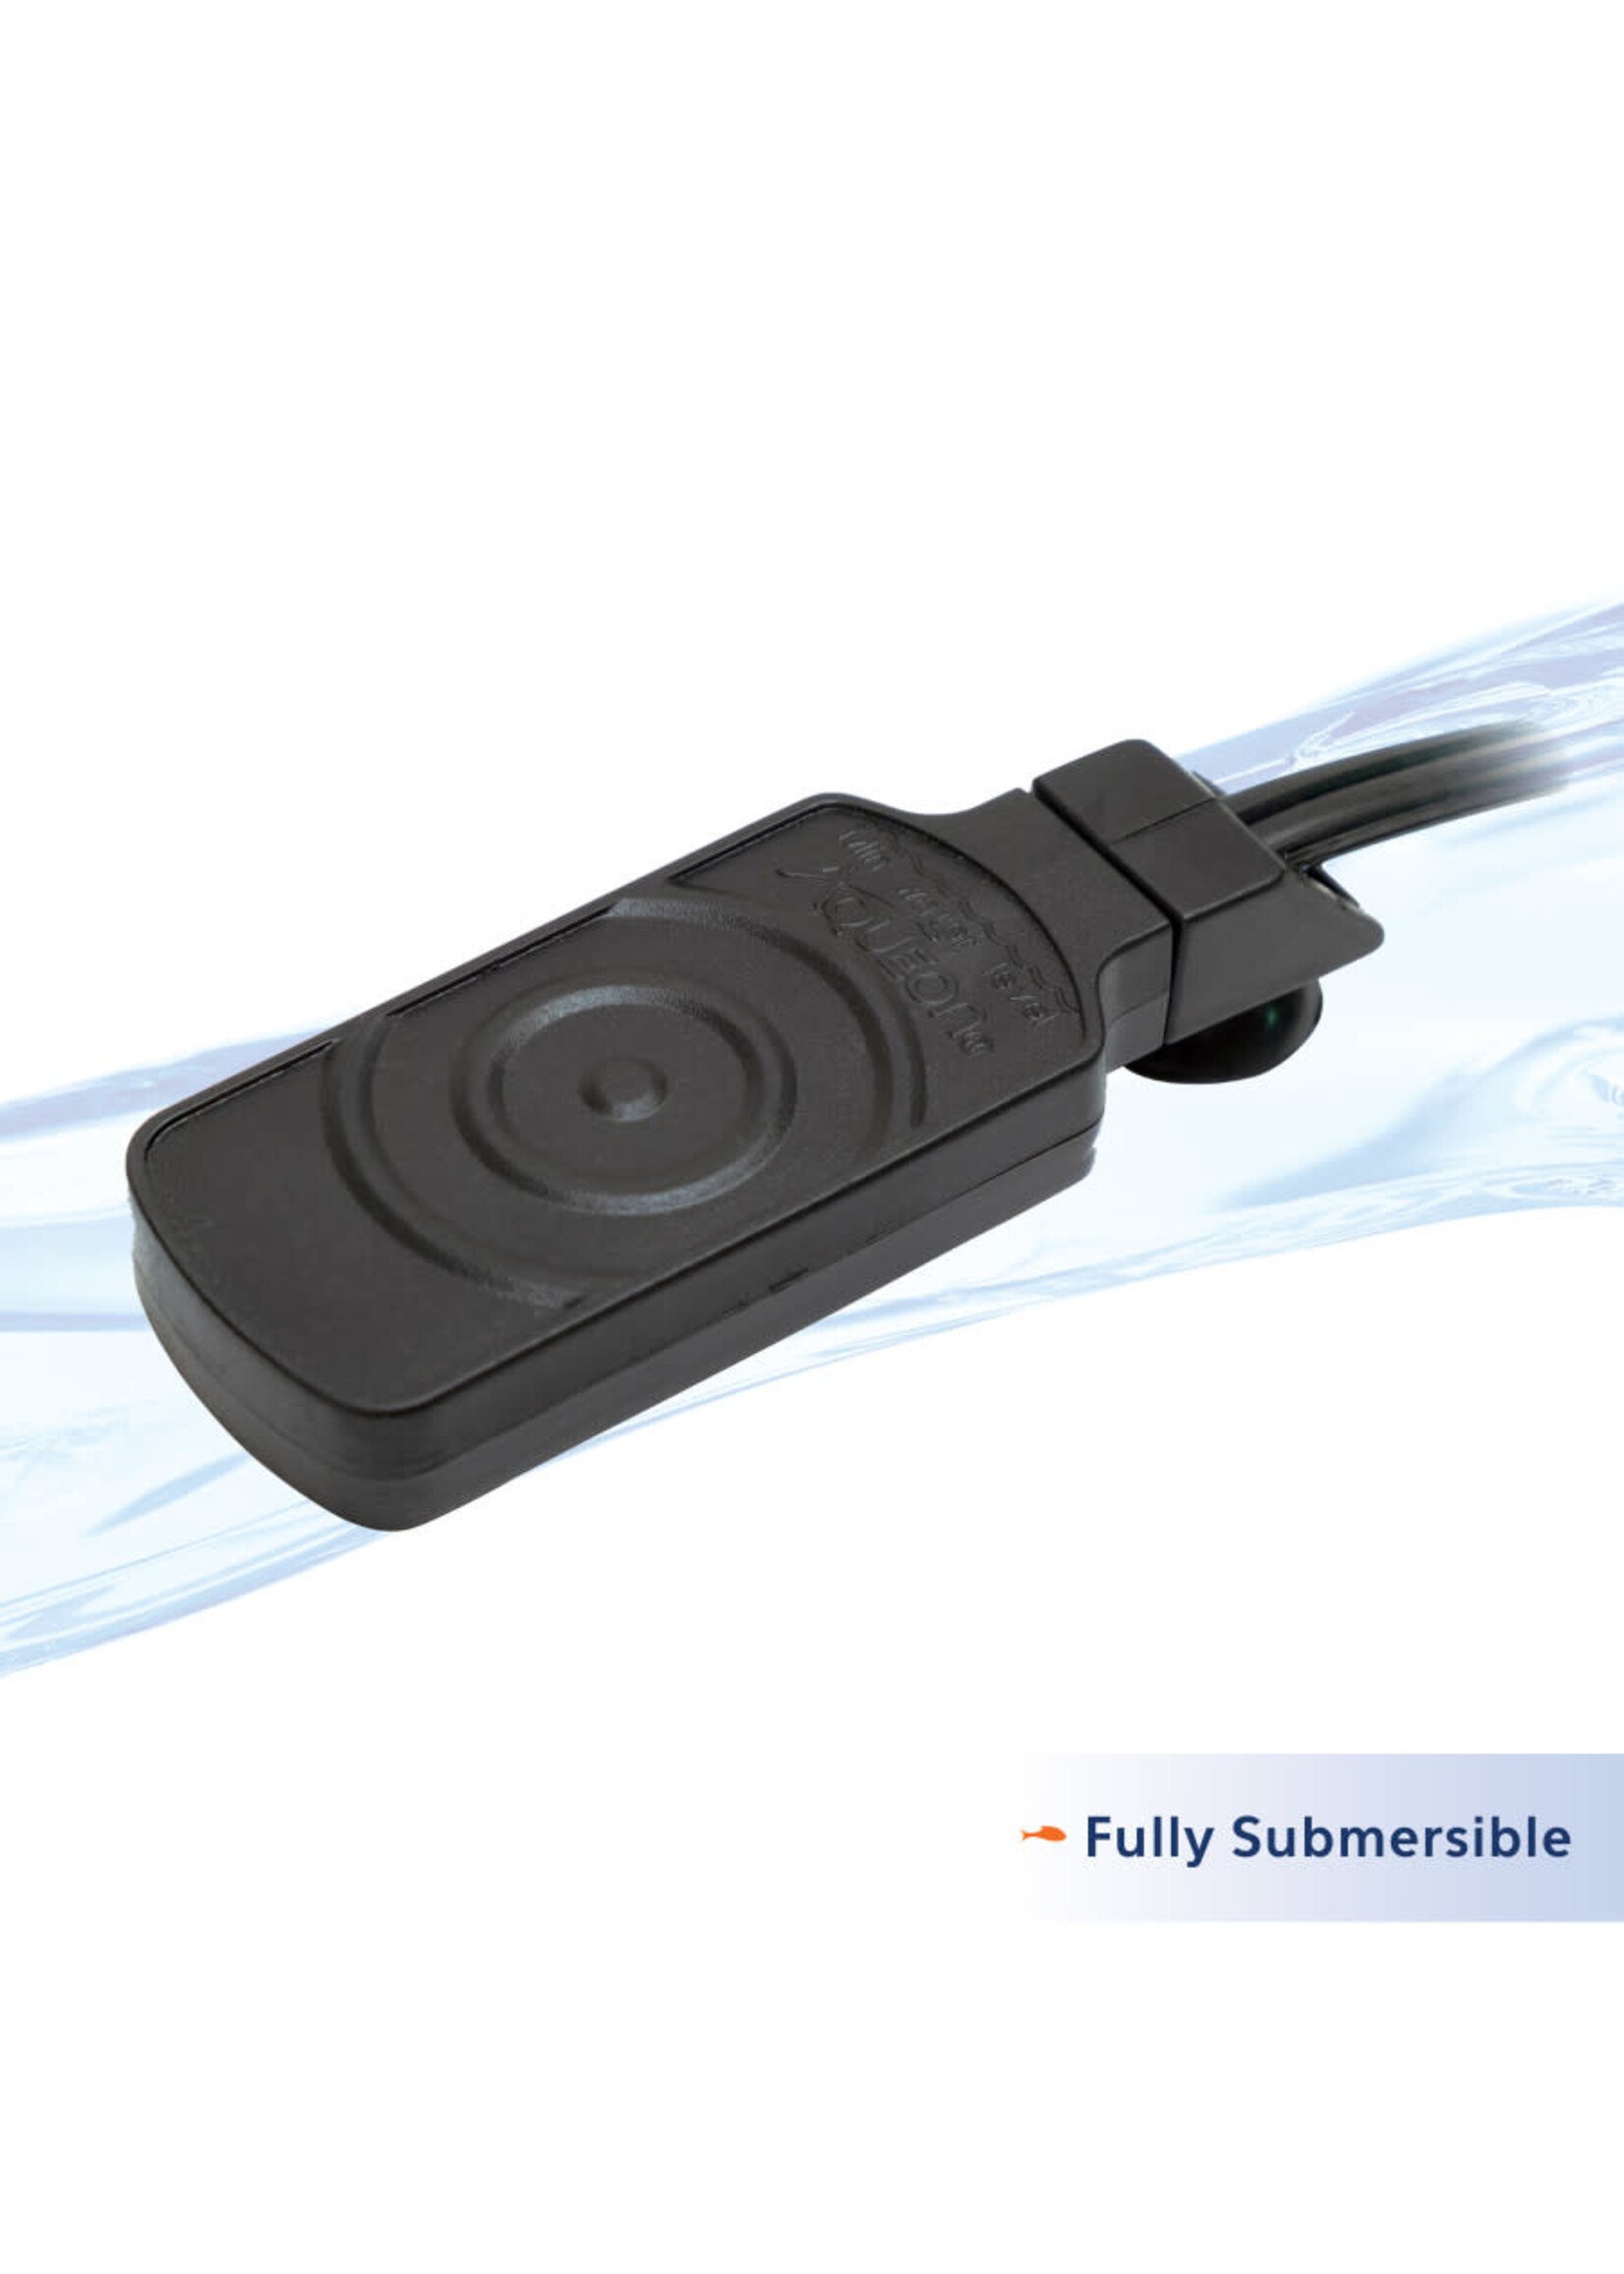 Aqueon HEATER FLAT SUBMERSIBLE 5 W UP TO 2 G